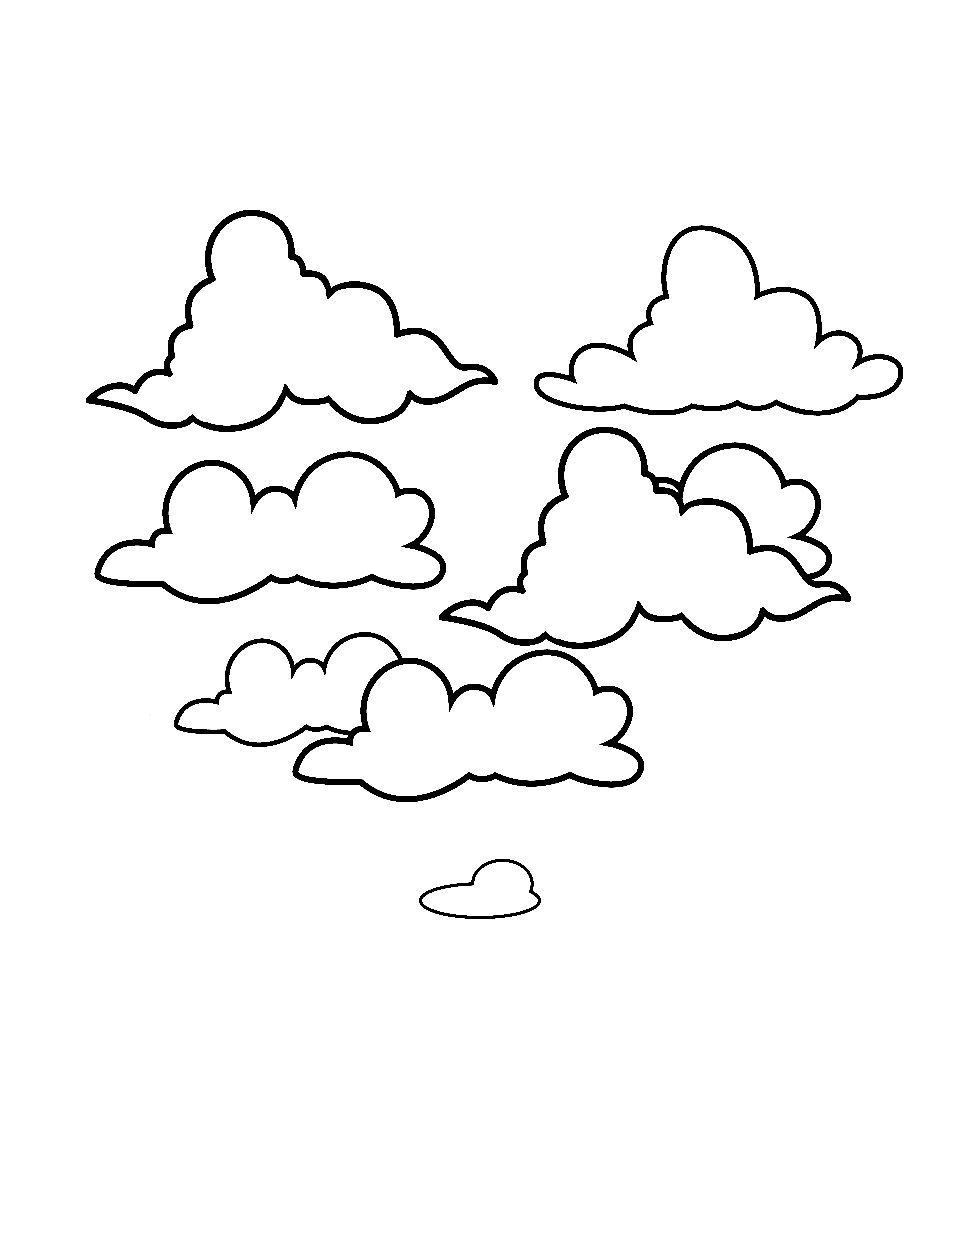 Heart-Shaped Clouds Coloring Page - Fluffy clouds in the sky forming an imaginary heart shape.